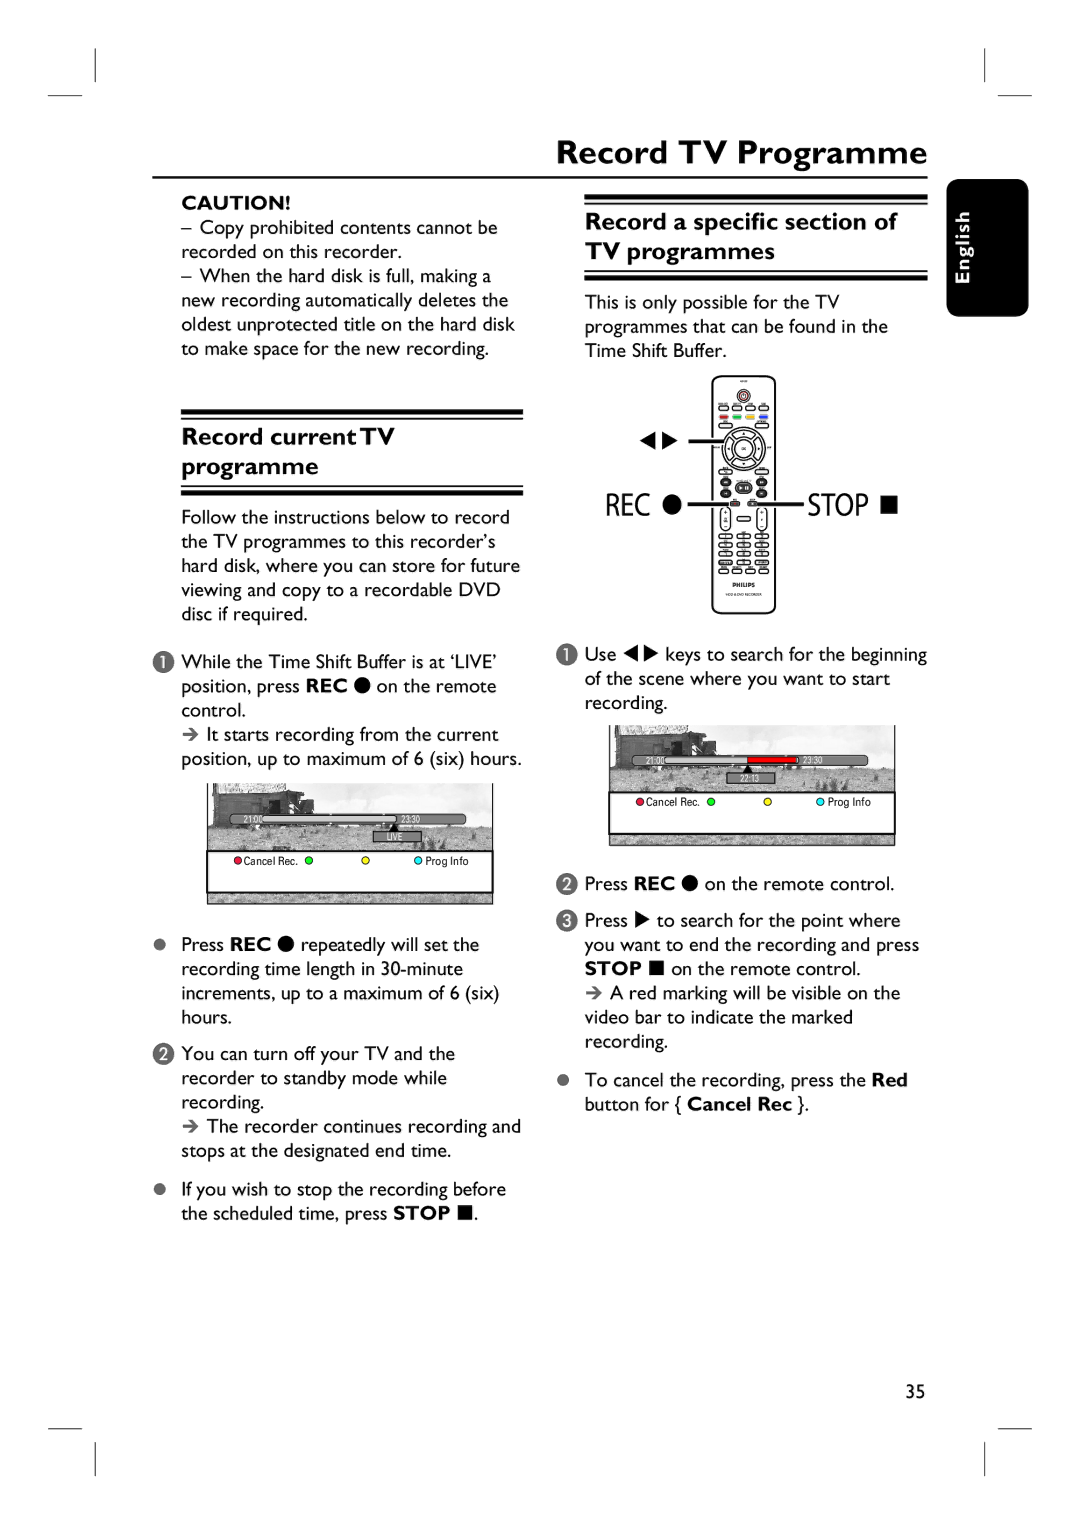 ProForm DVDR3570H user manual Record TV Programme, Record a specific section of TV programmes, Record current TV programme 